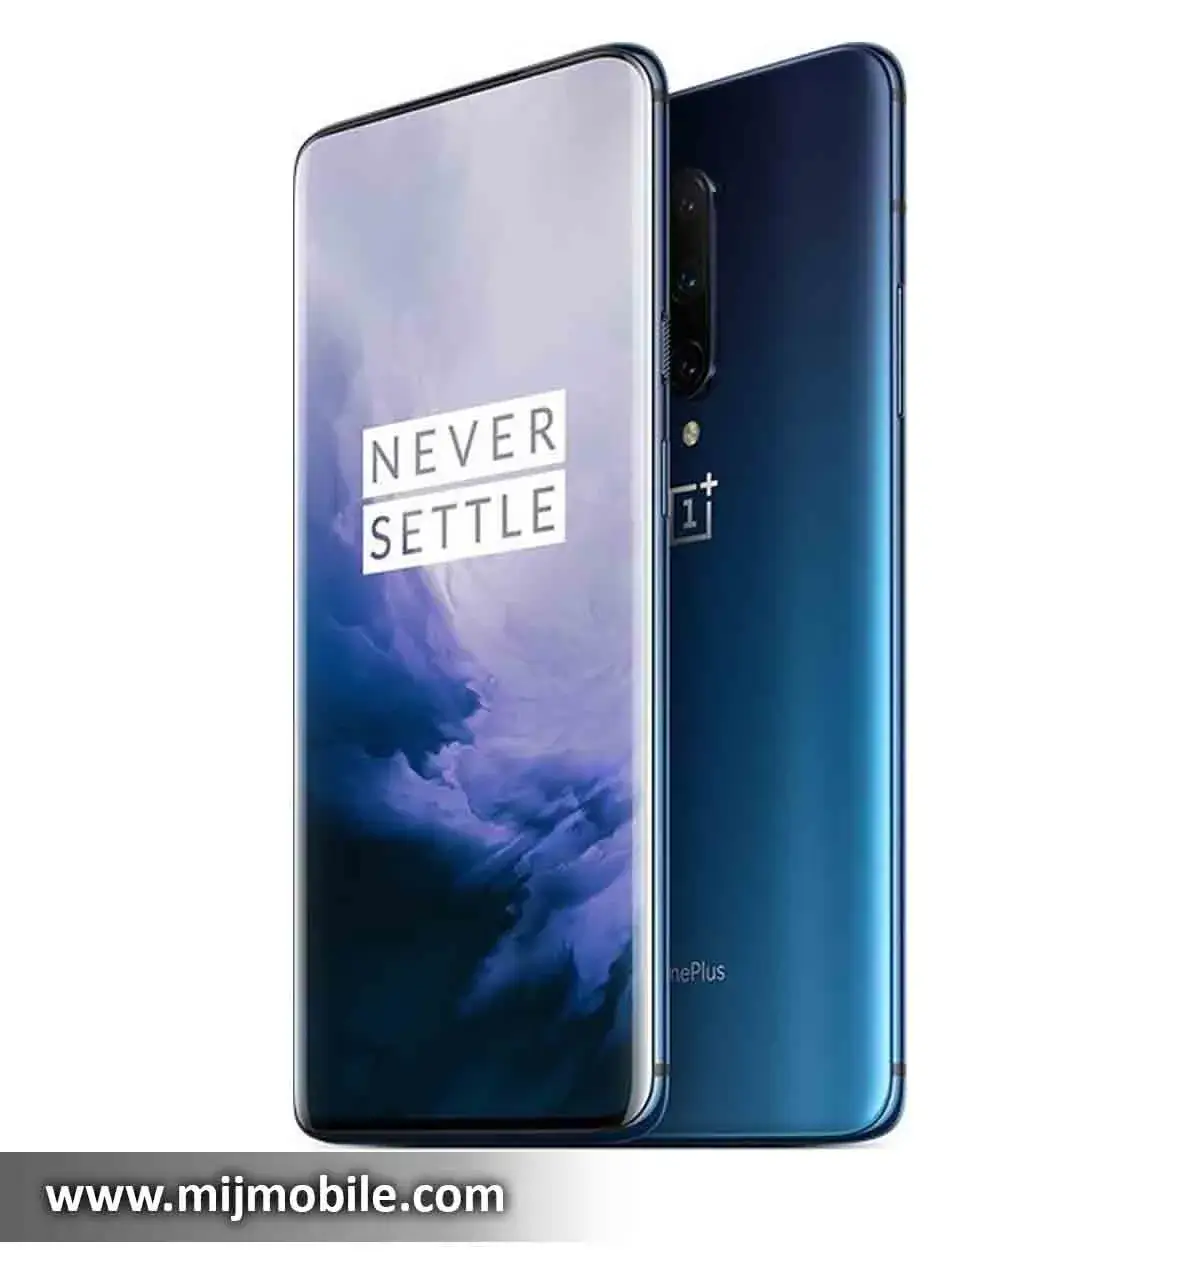 OnePlus 7 Pro Price in Pakistan & Specifications OnePlus 7 Pro Price in Pakistan is 83,000.